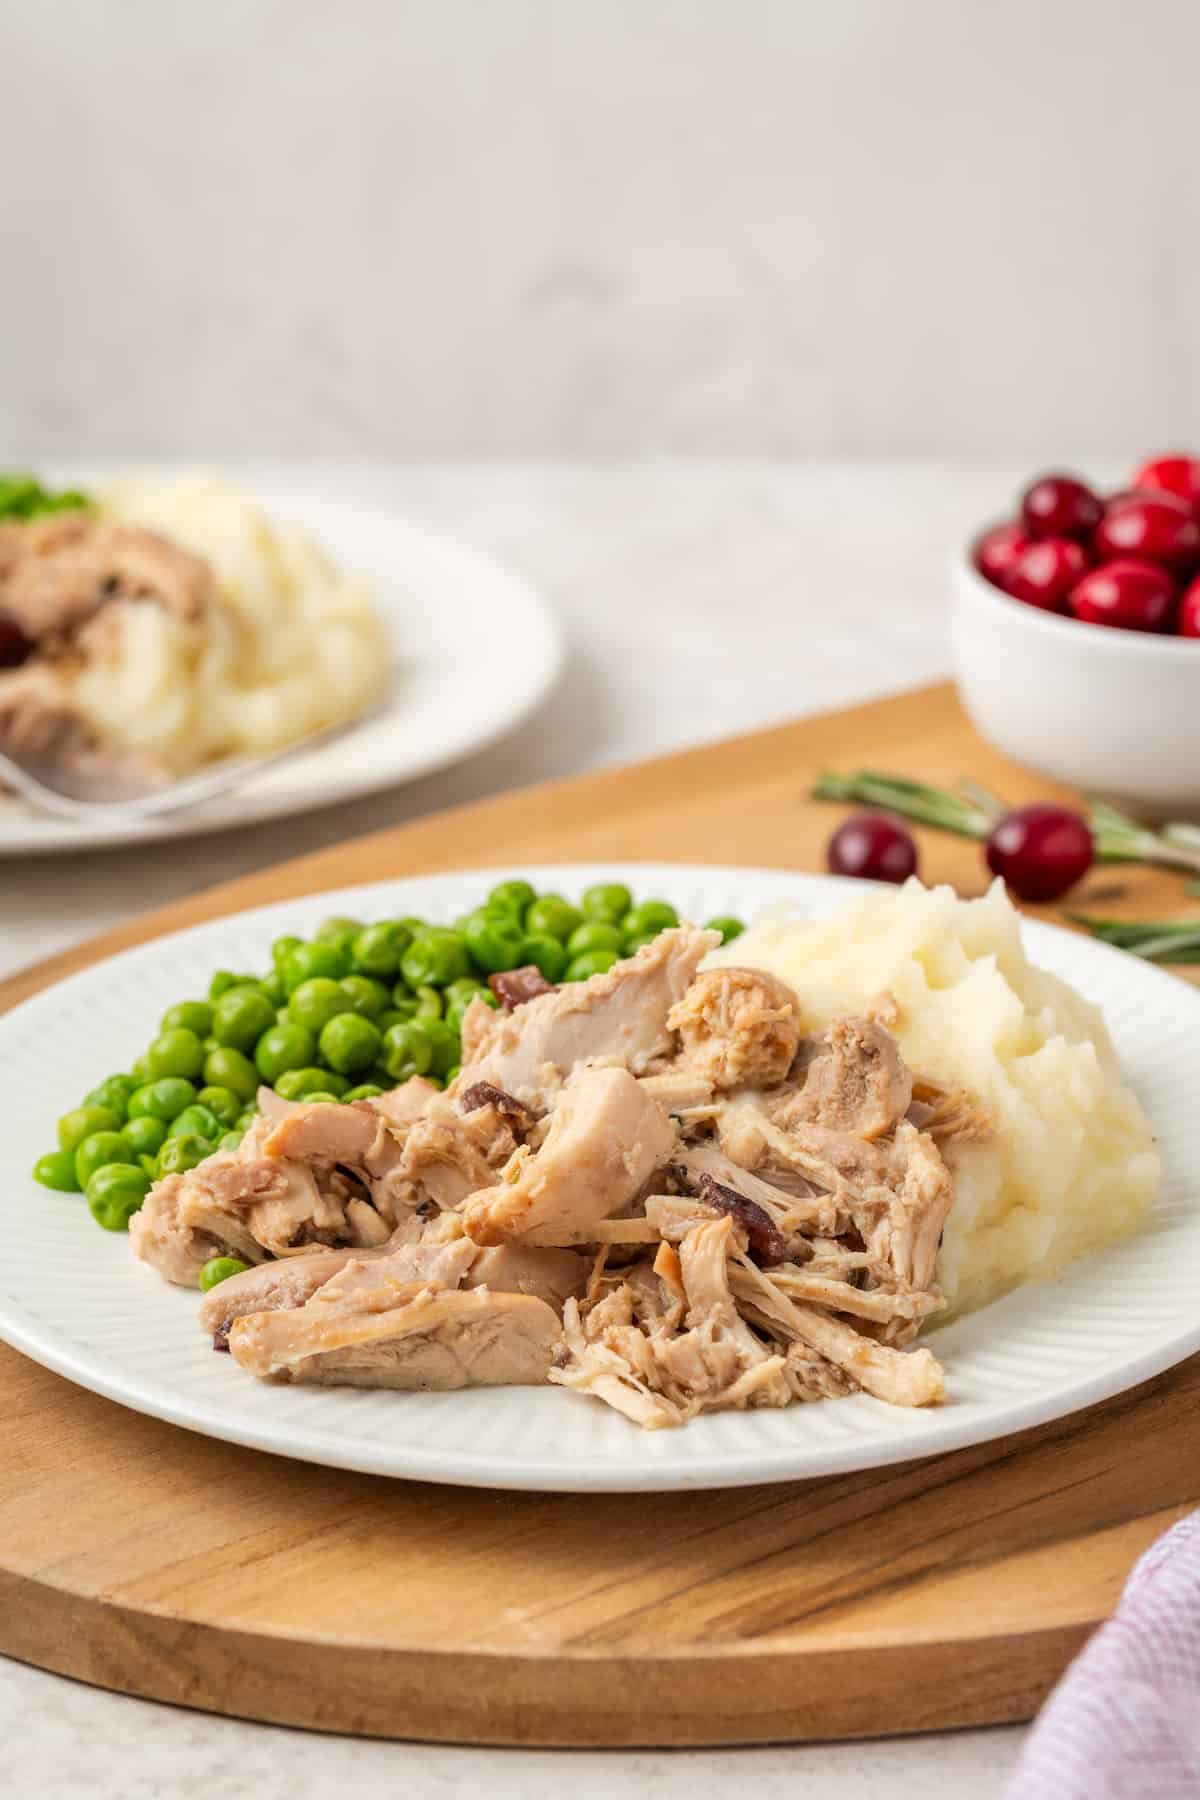 Shredded crock pot cranberry Dijon chicken served alongside mashed potatoes and peas on a white dinner plate.